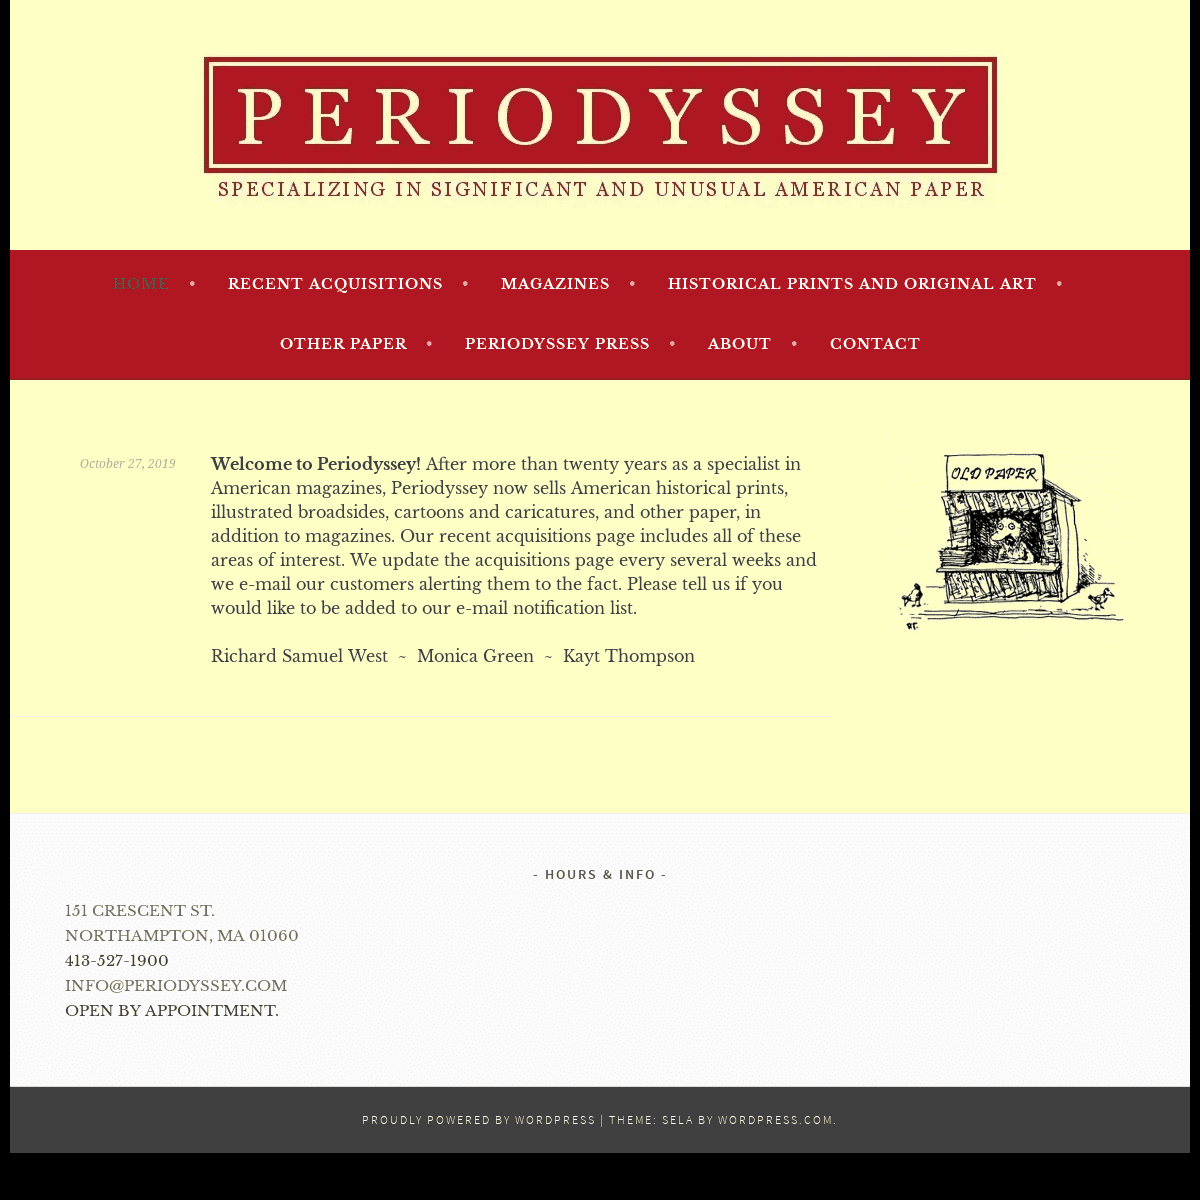 A complete backup of periodyssey.com